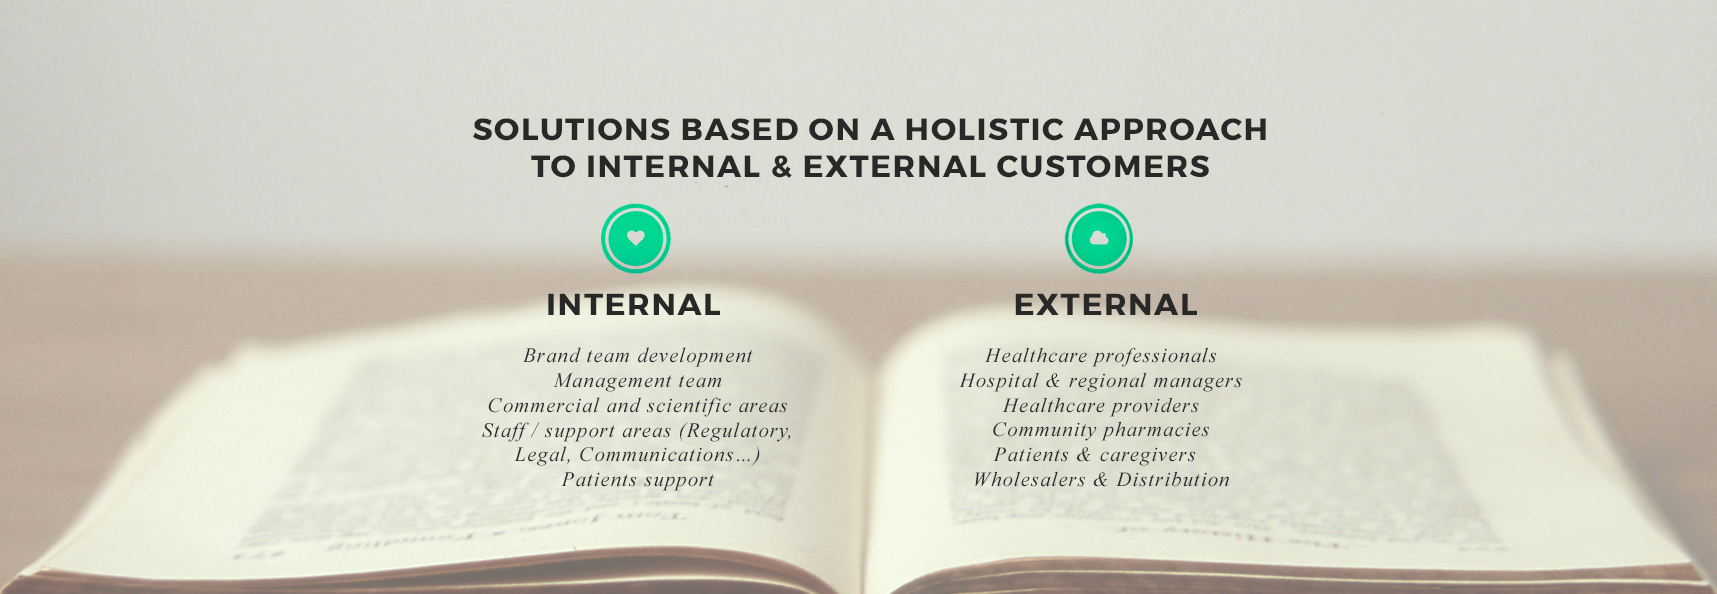 SOLUTIONS BASED ON A HOLISTIC APPROACH TO INTERNAL & EXTERNAL CUSTOMERS